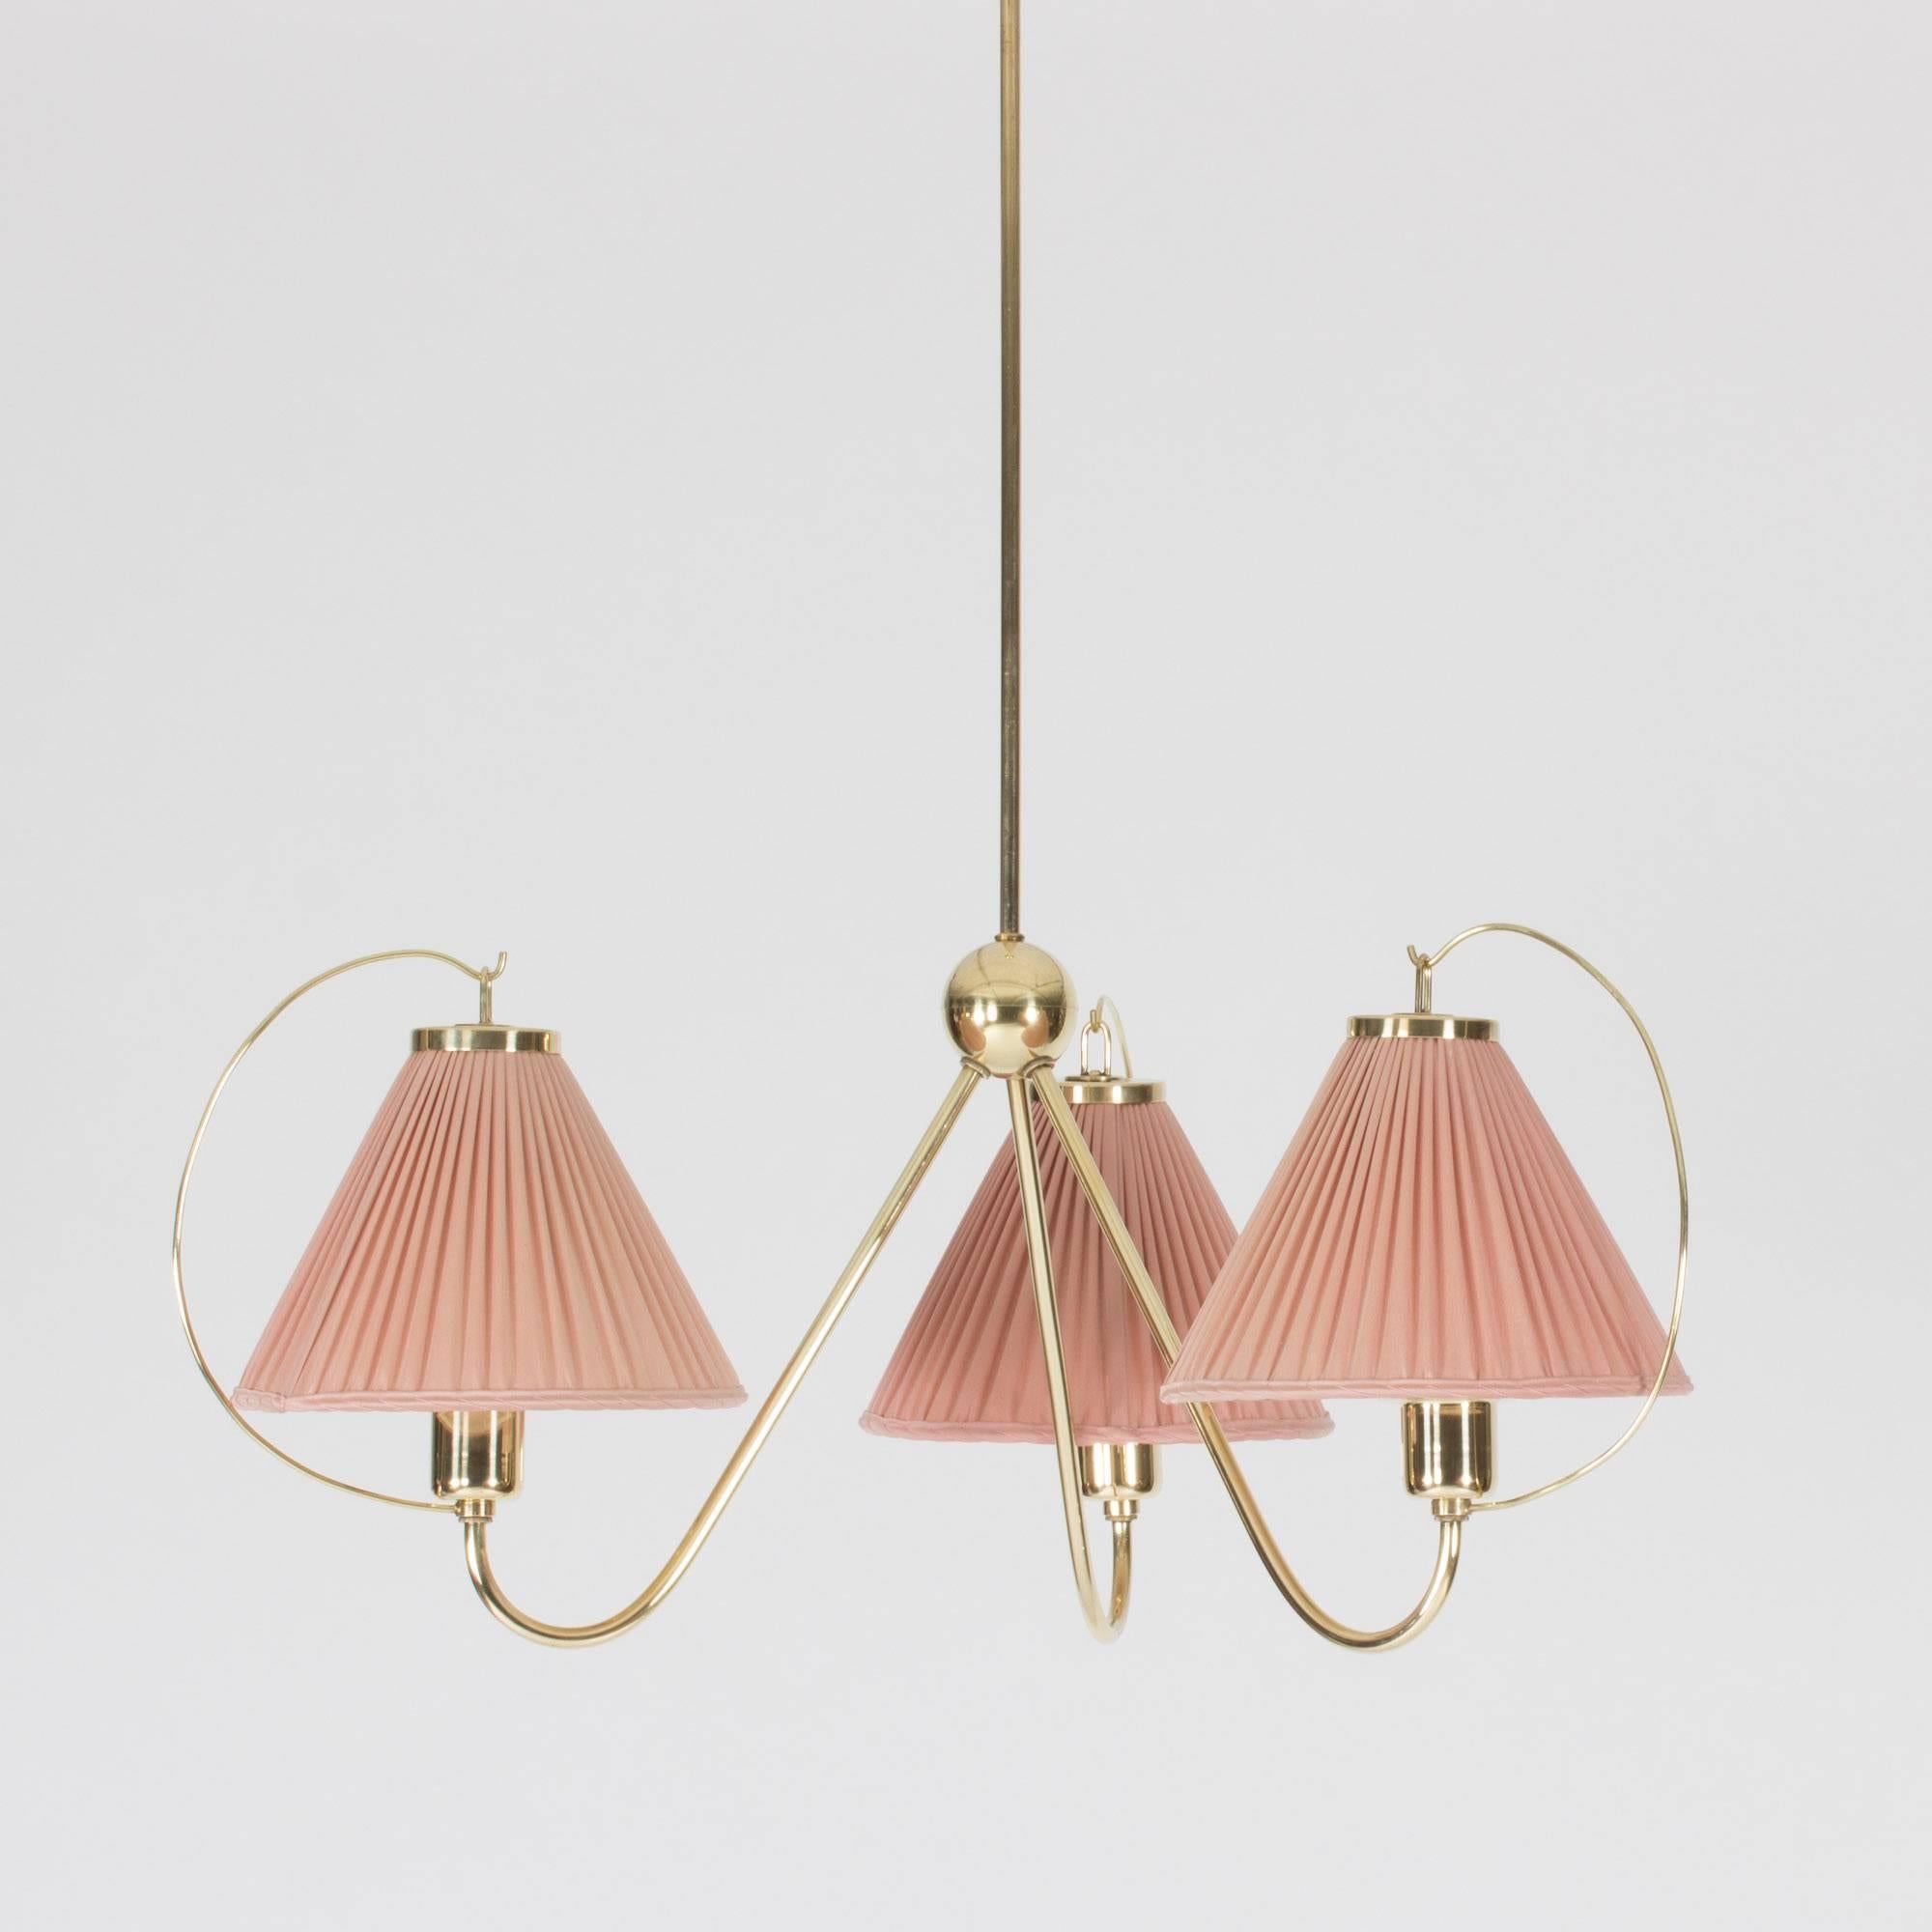 Amazing ceiling lamp by Josef Frank, made from brass with three shades in original dusty pink fabric. Beautiful, slender design where the three arms plunge from a brass globe in the centre. Arched brass strands extend from the sockets and suspend